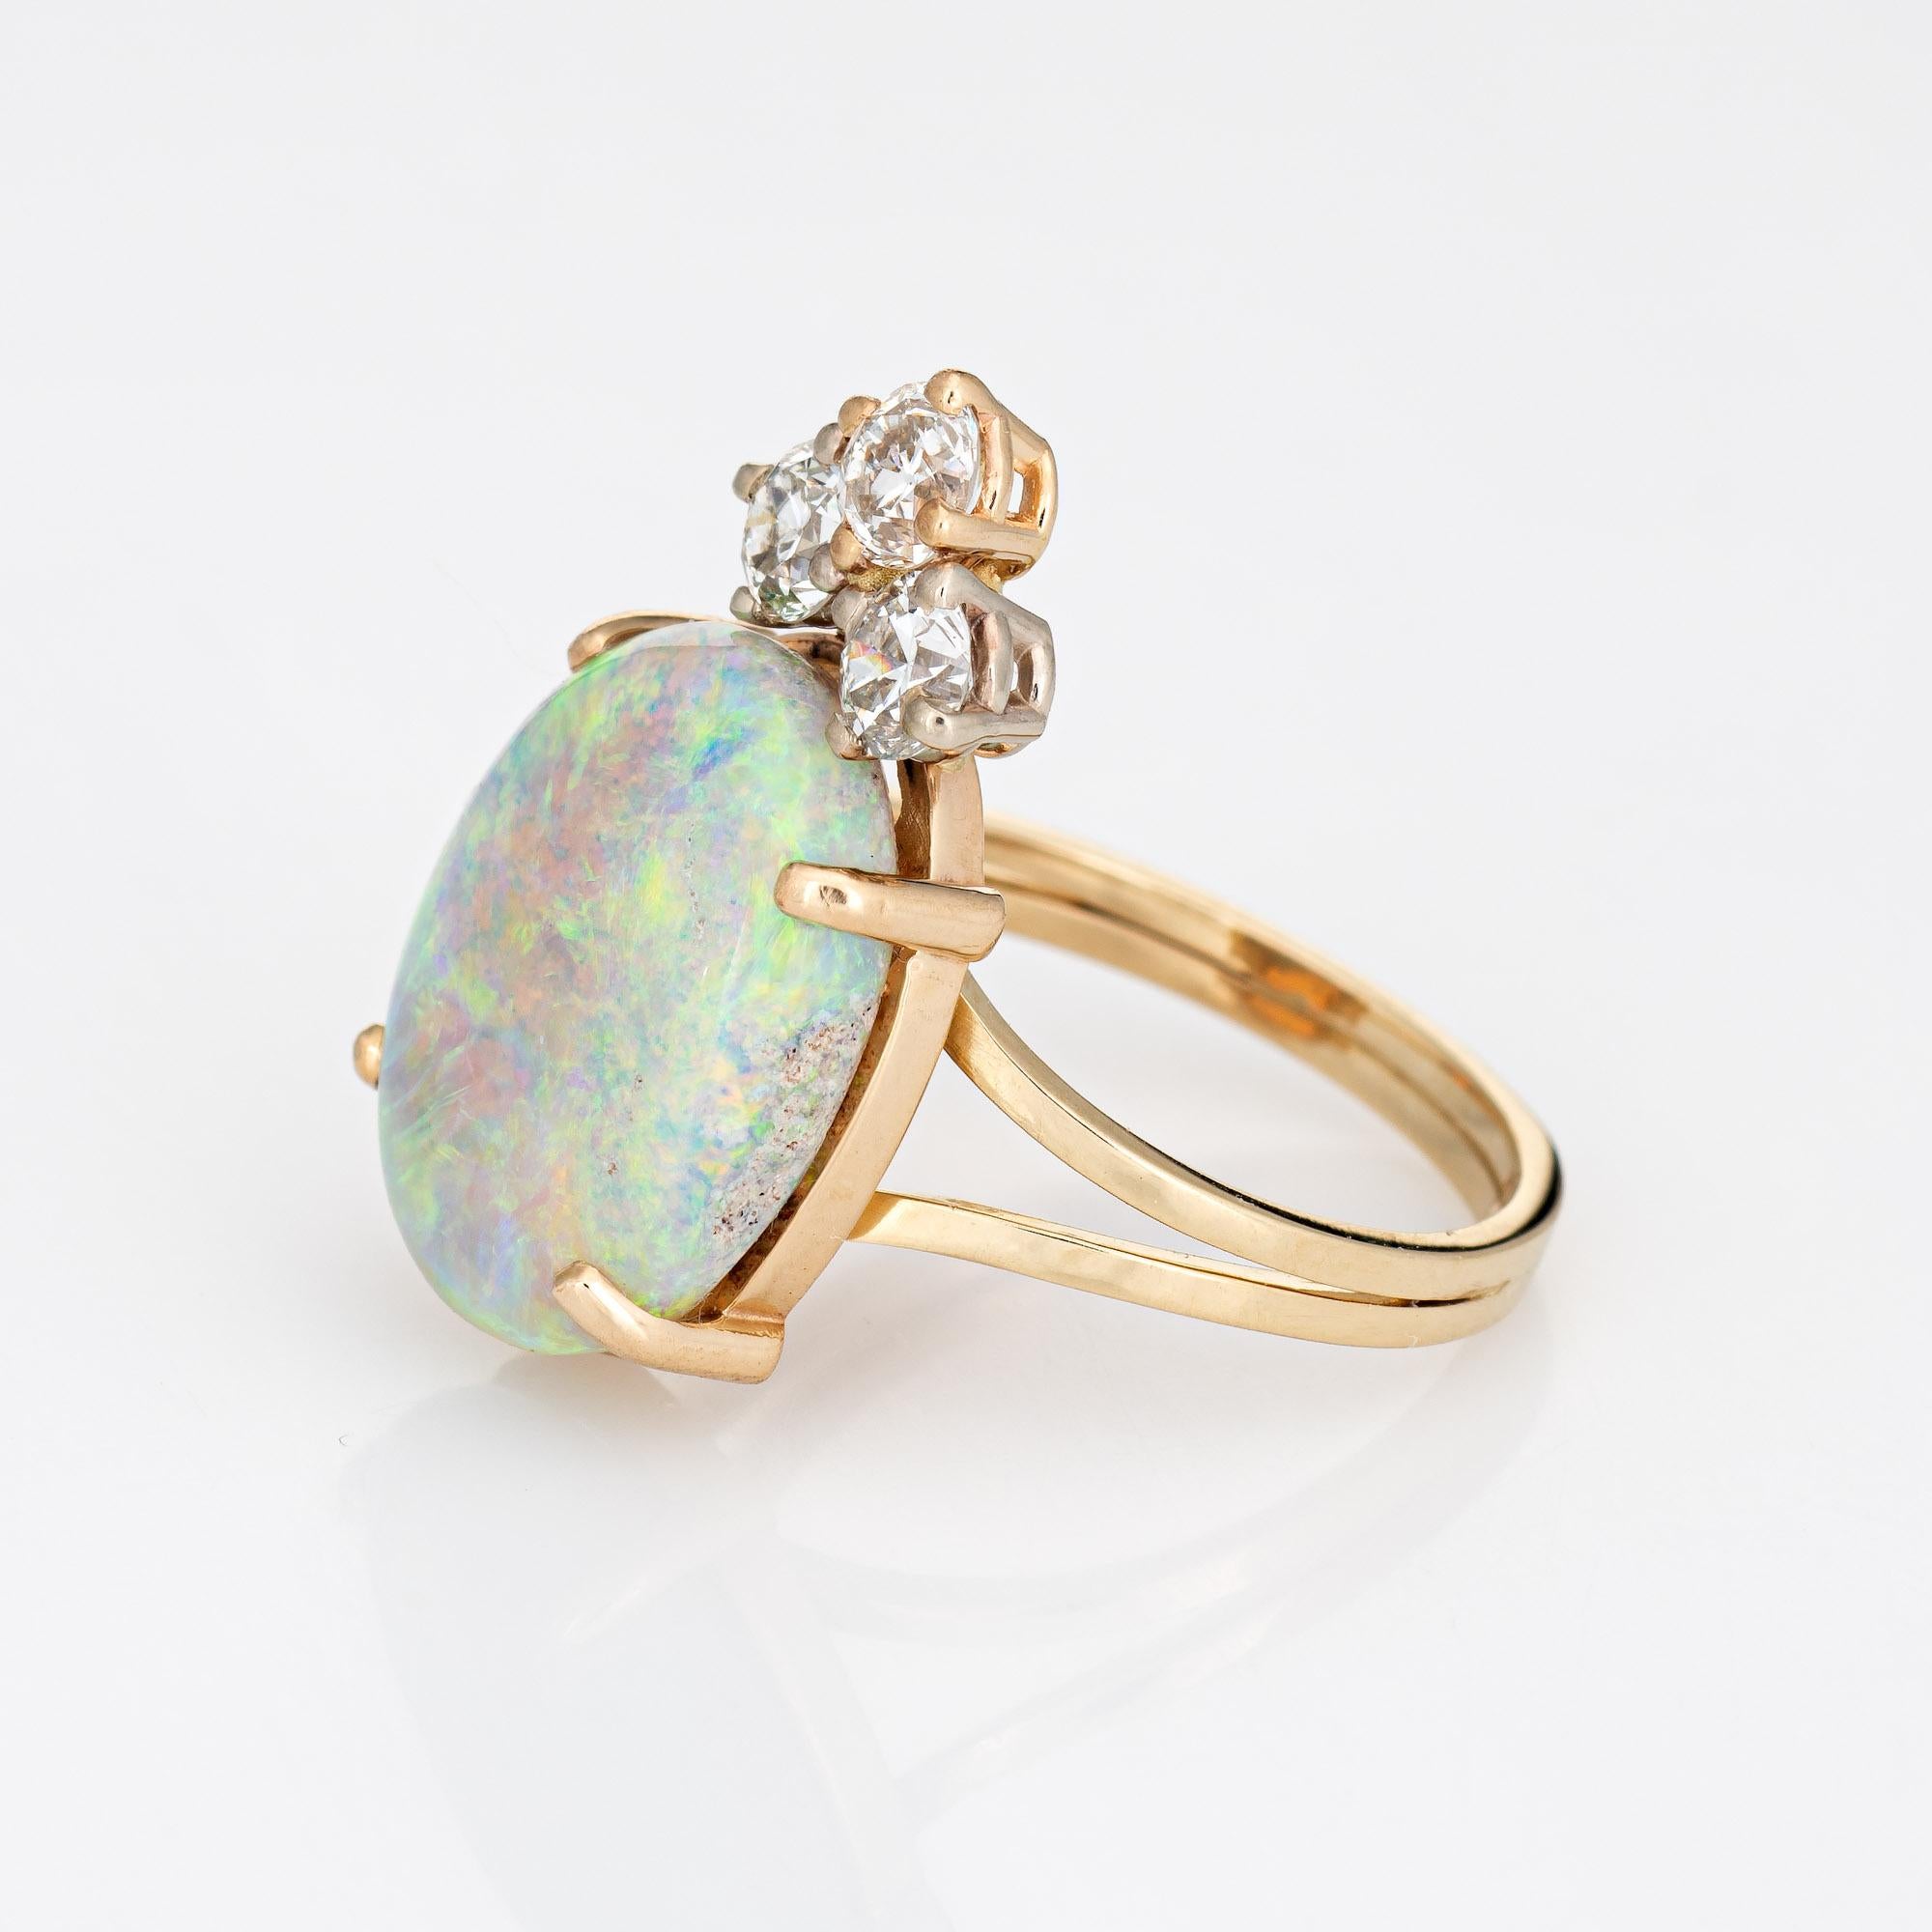 Taille cabochon Nature Opal Diamond Ring Vintage 14k Yellow Gold Oval Crown Jewelry en vente